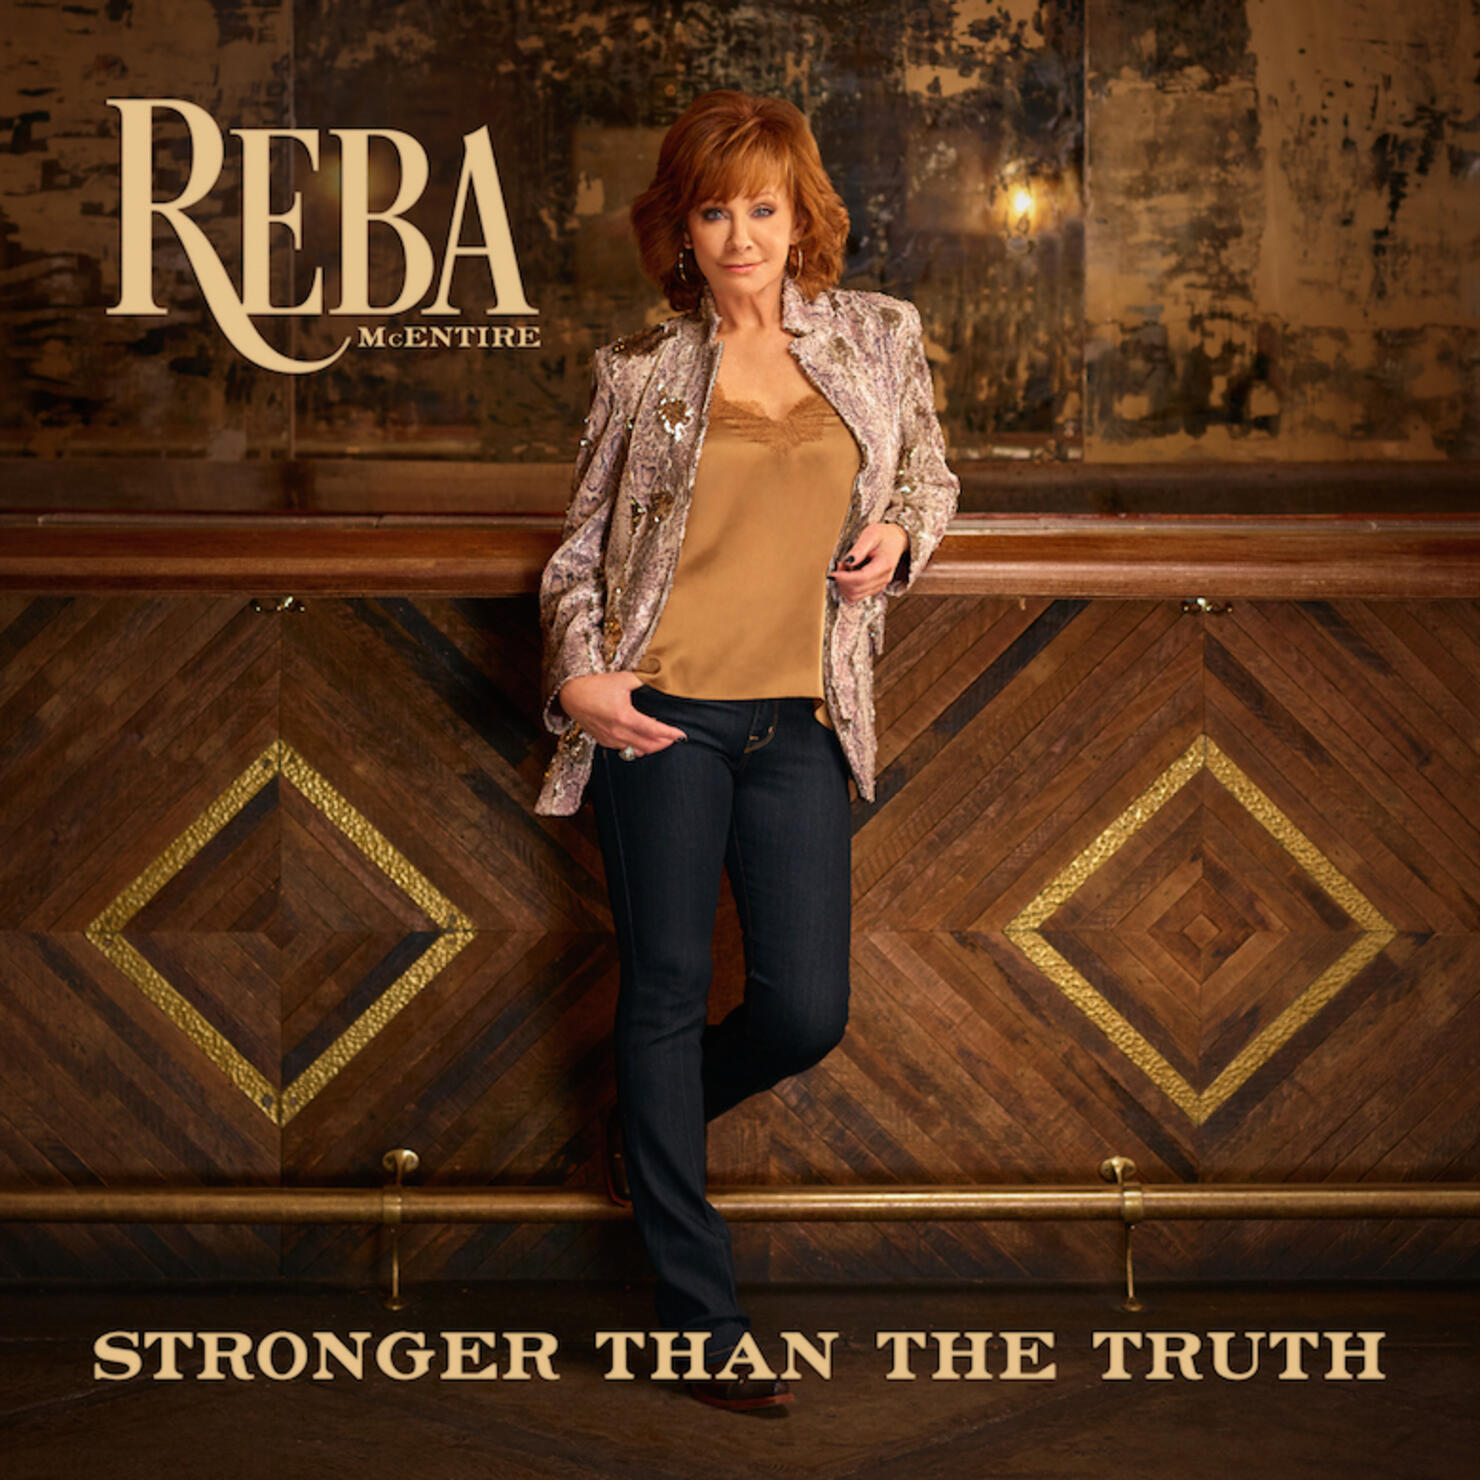 Reba McEntire Shares New Song "Freedom" iHeart